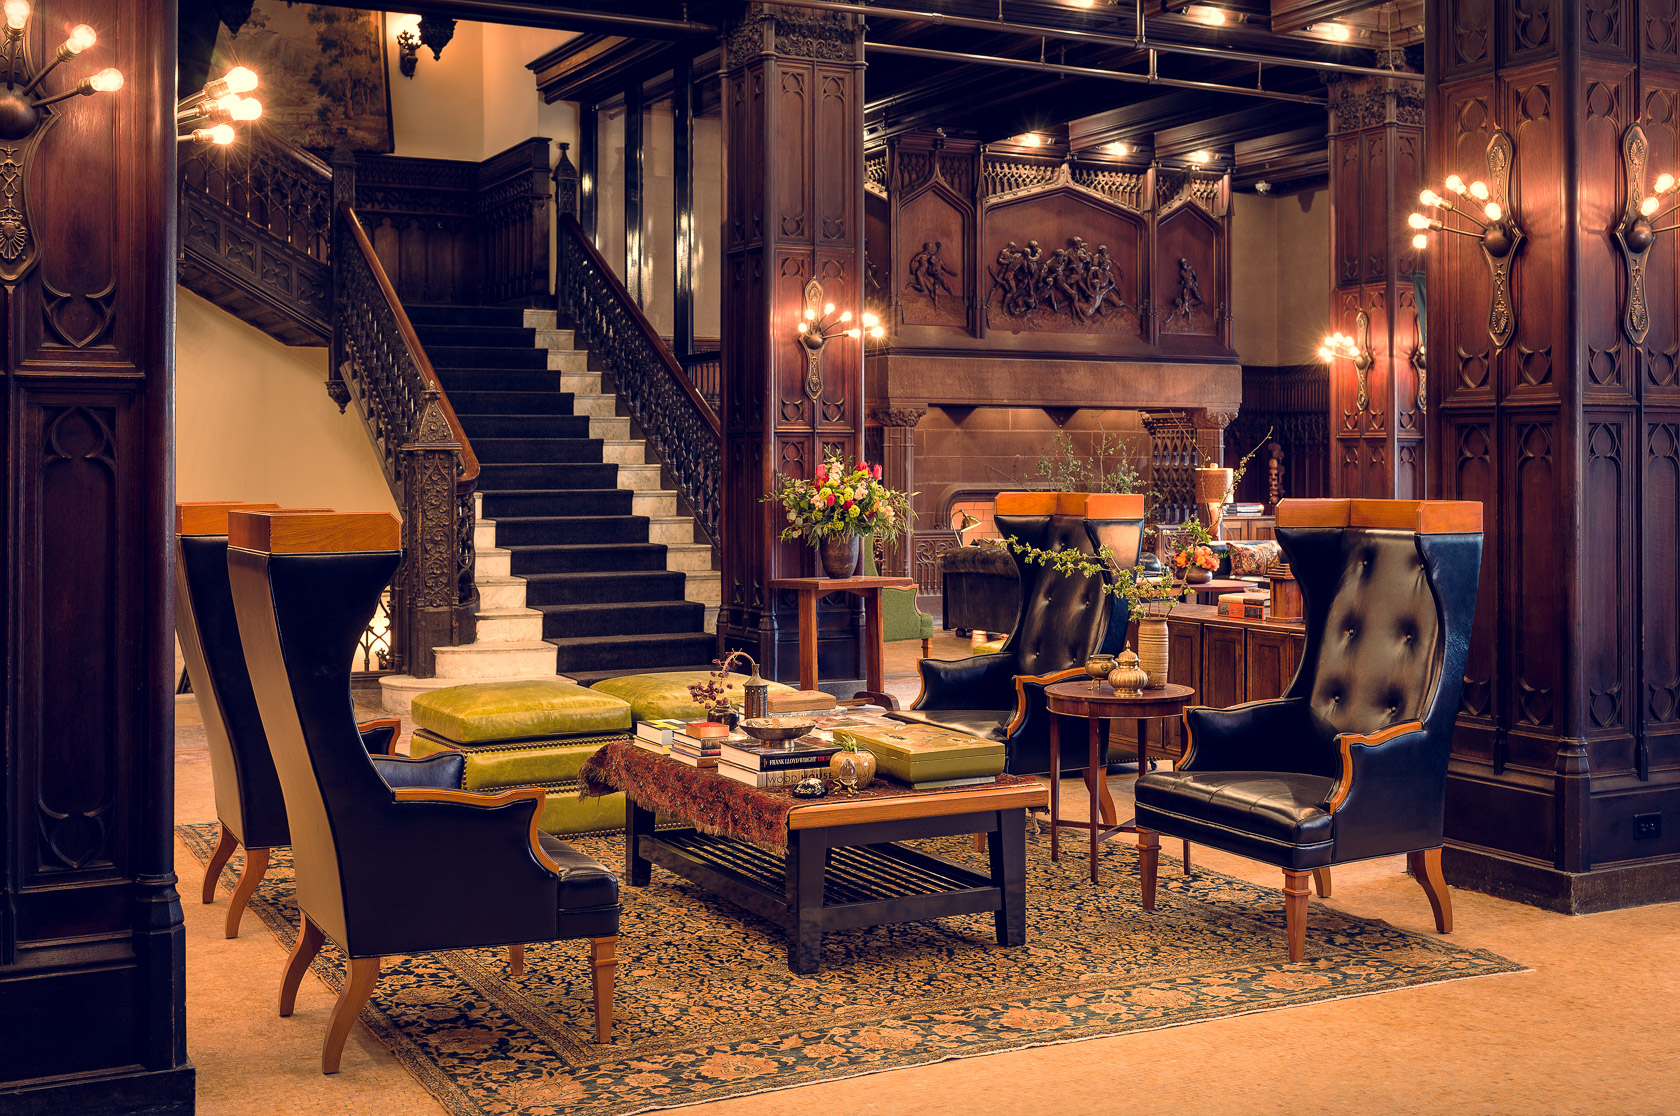 chicago athletic Association hotel lobby with decorative vintage wood paneling and eclectic furniture